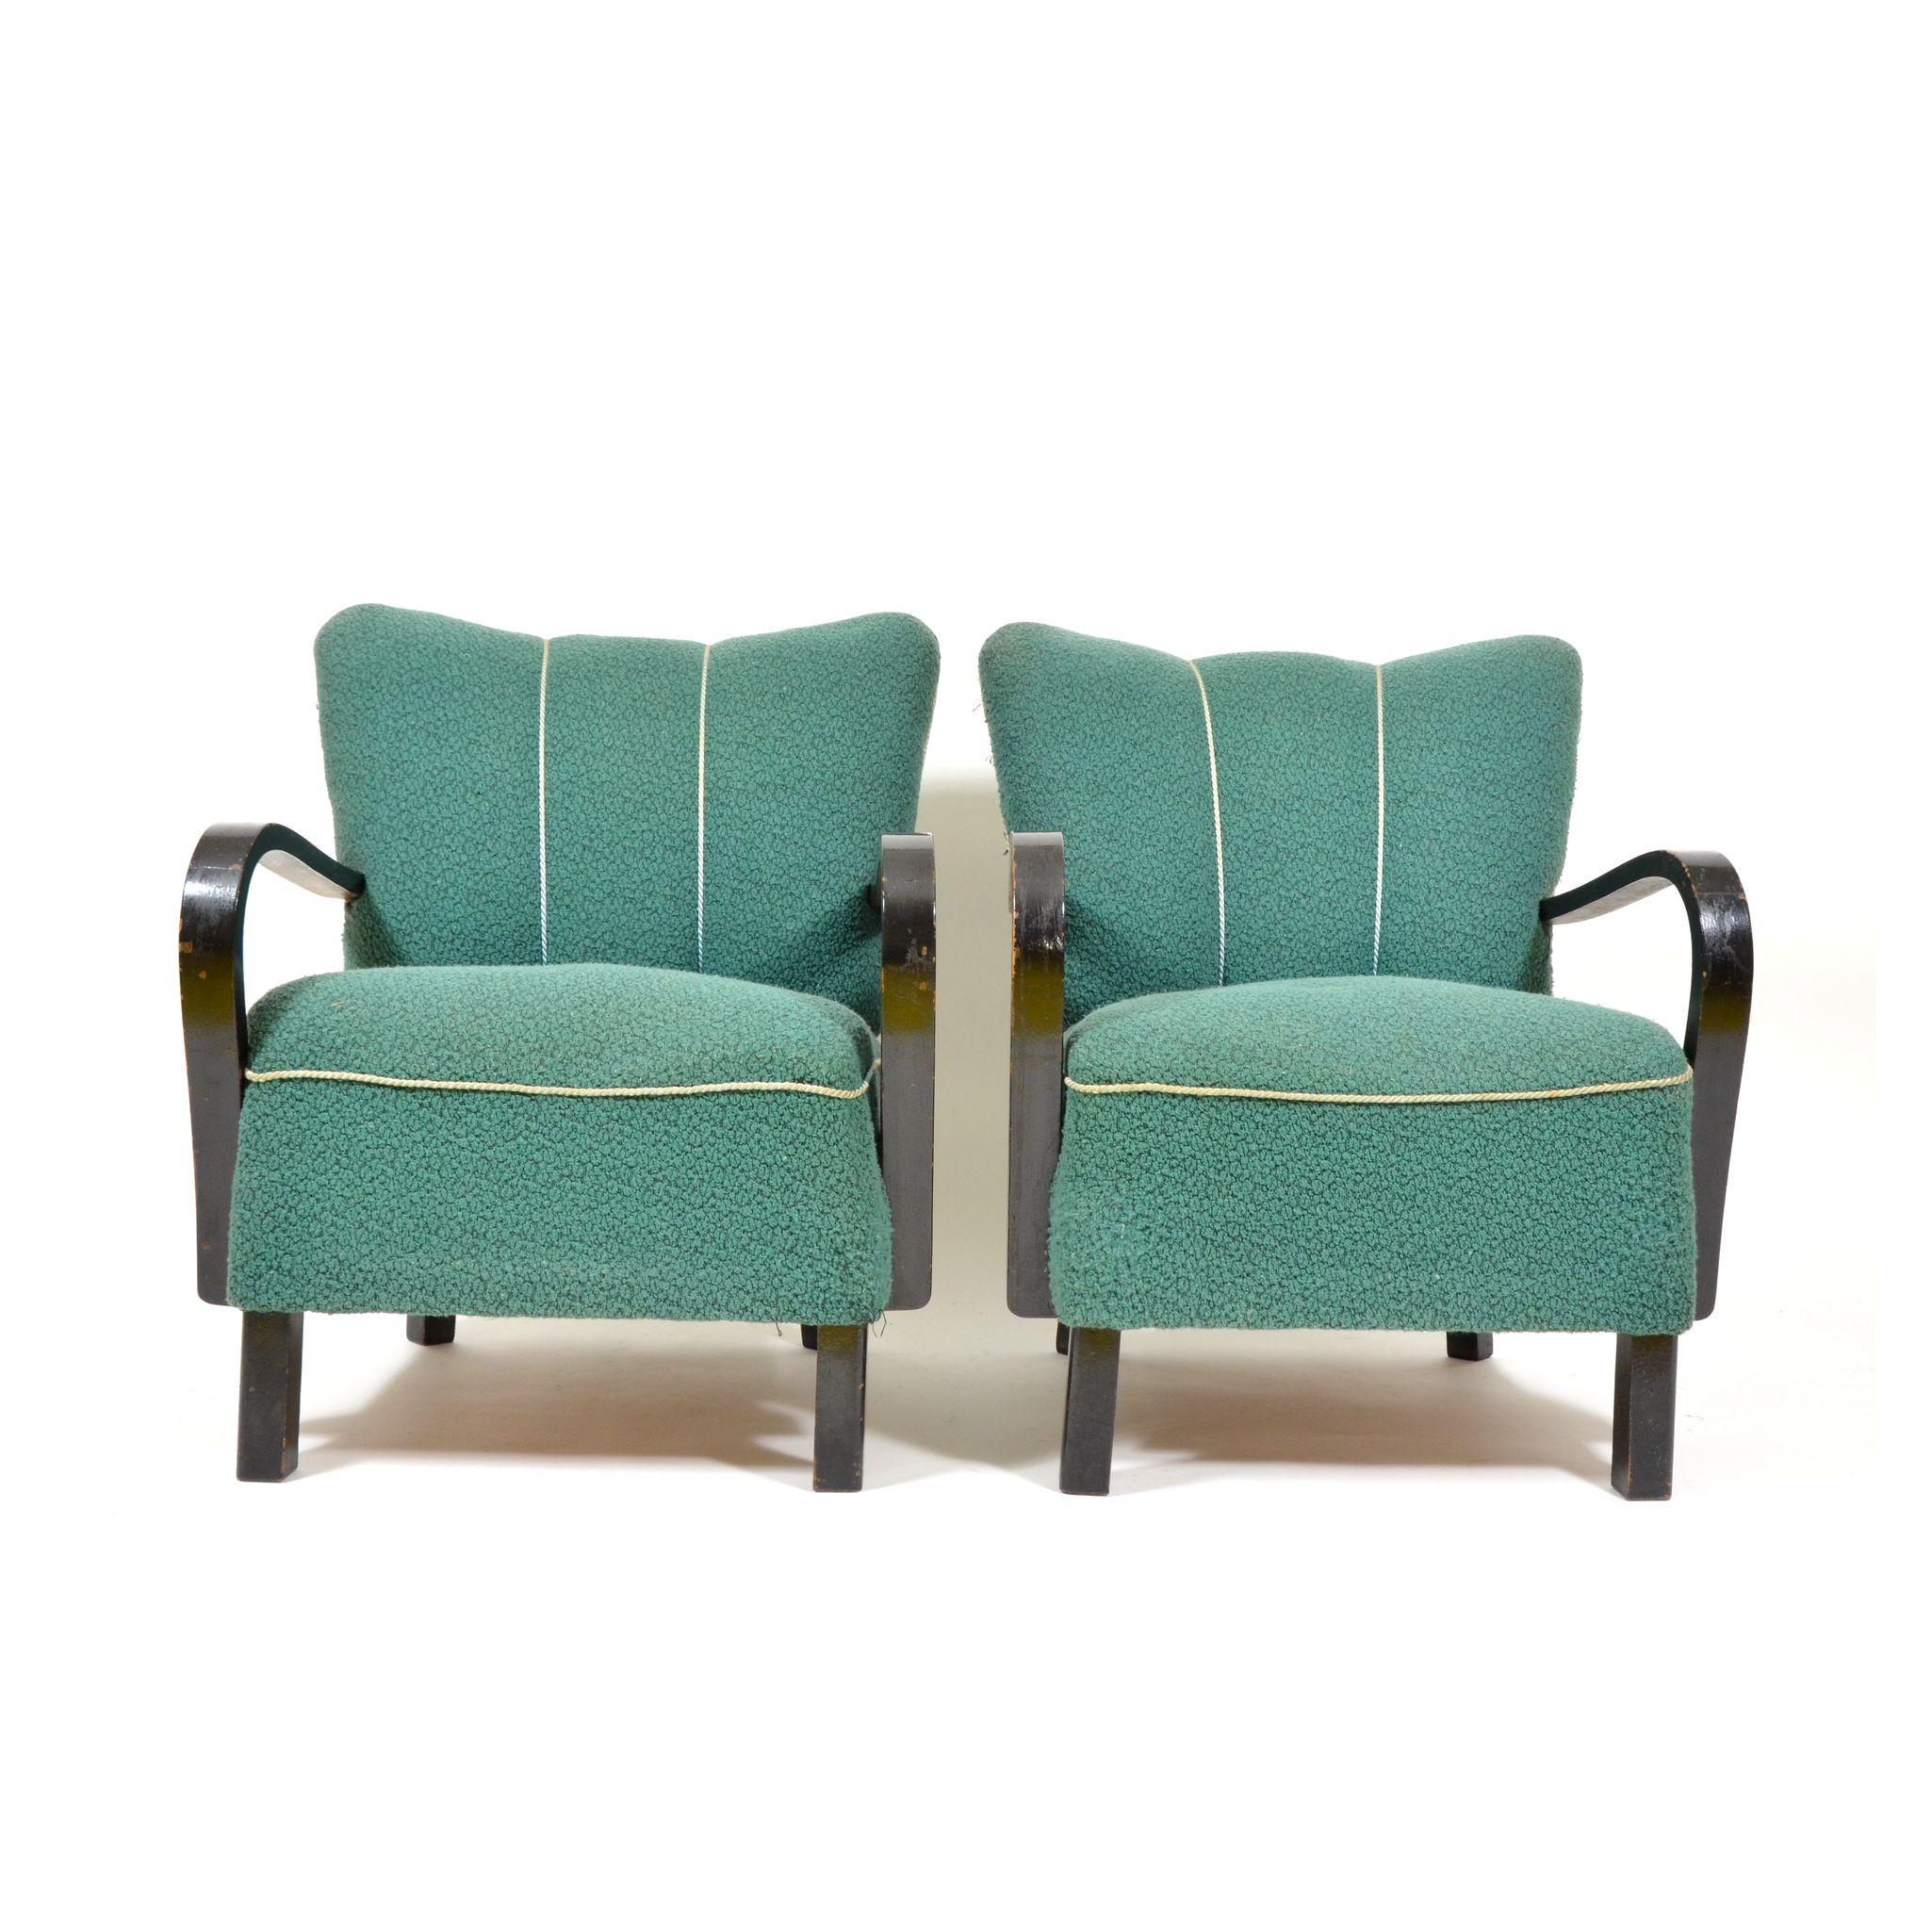 Mid-20th Century Pair of Original Armchairs with Wooden Armrests, Czechoslovakia, 1940s For Sale